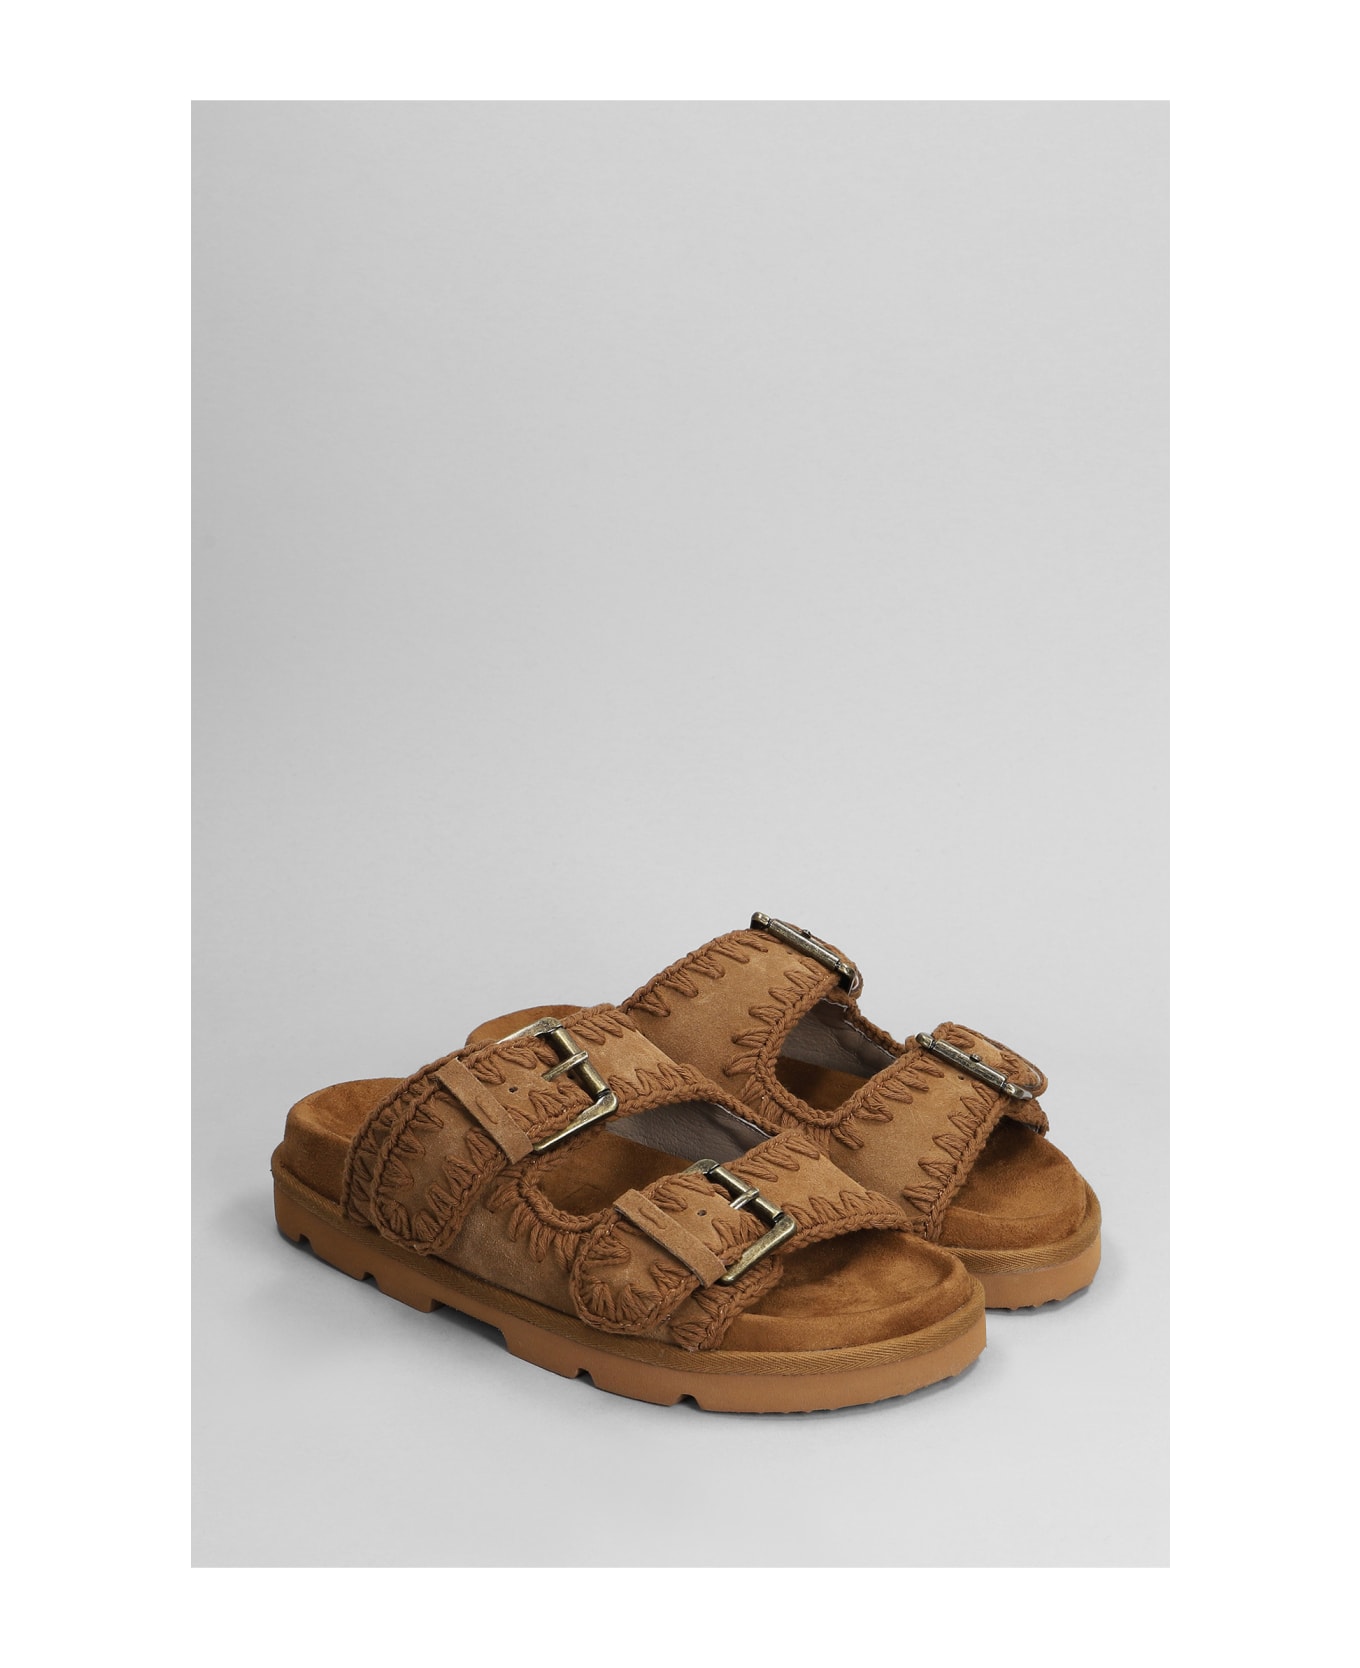 Mou Low Bio Sandal Slipper-mule In Leather Color Suede - leather color サンダル